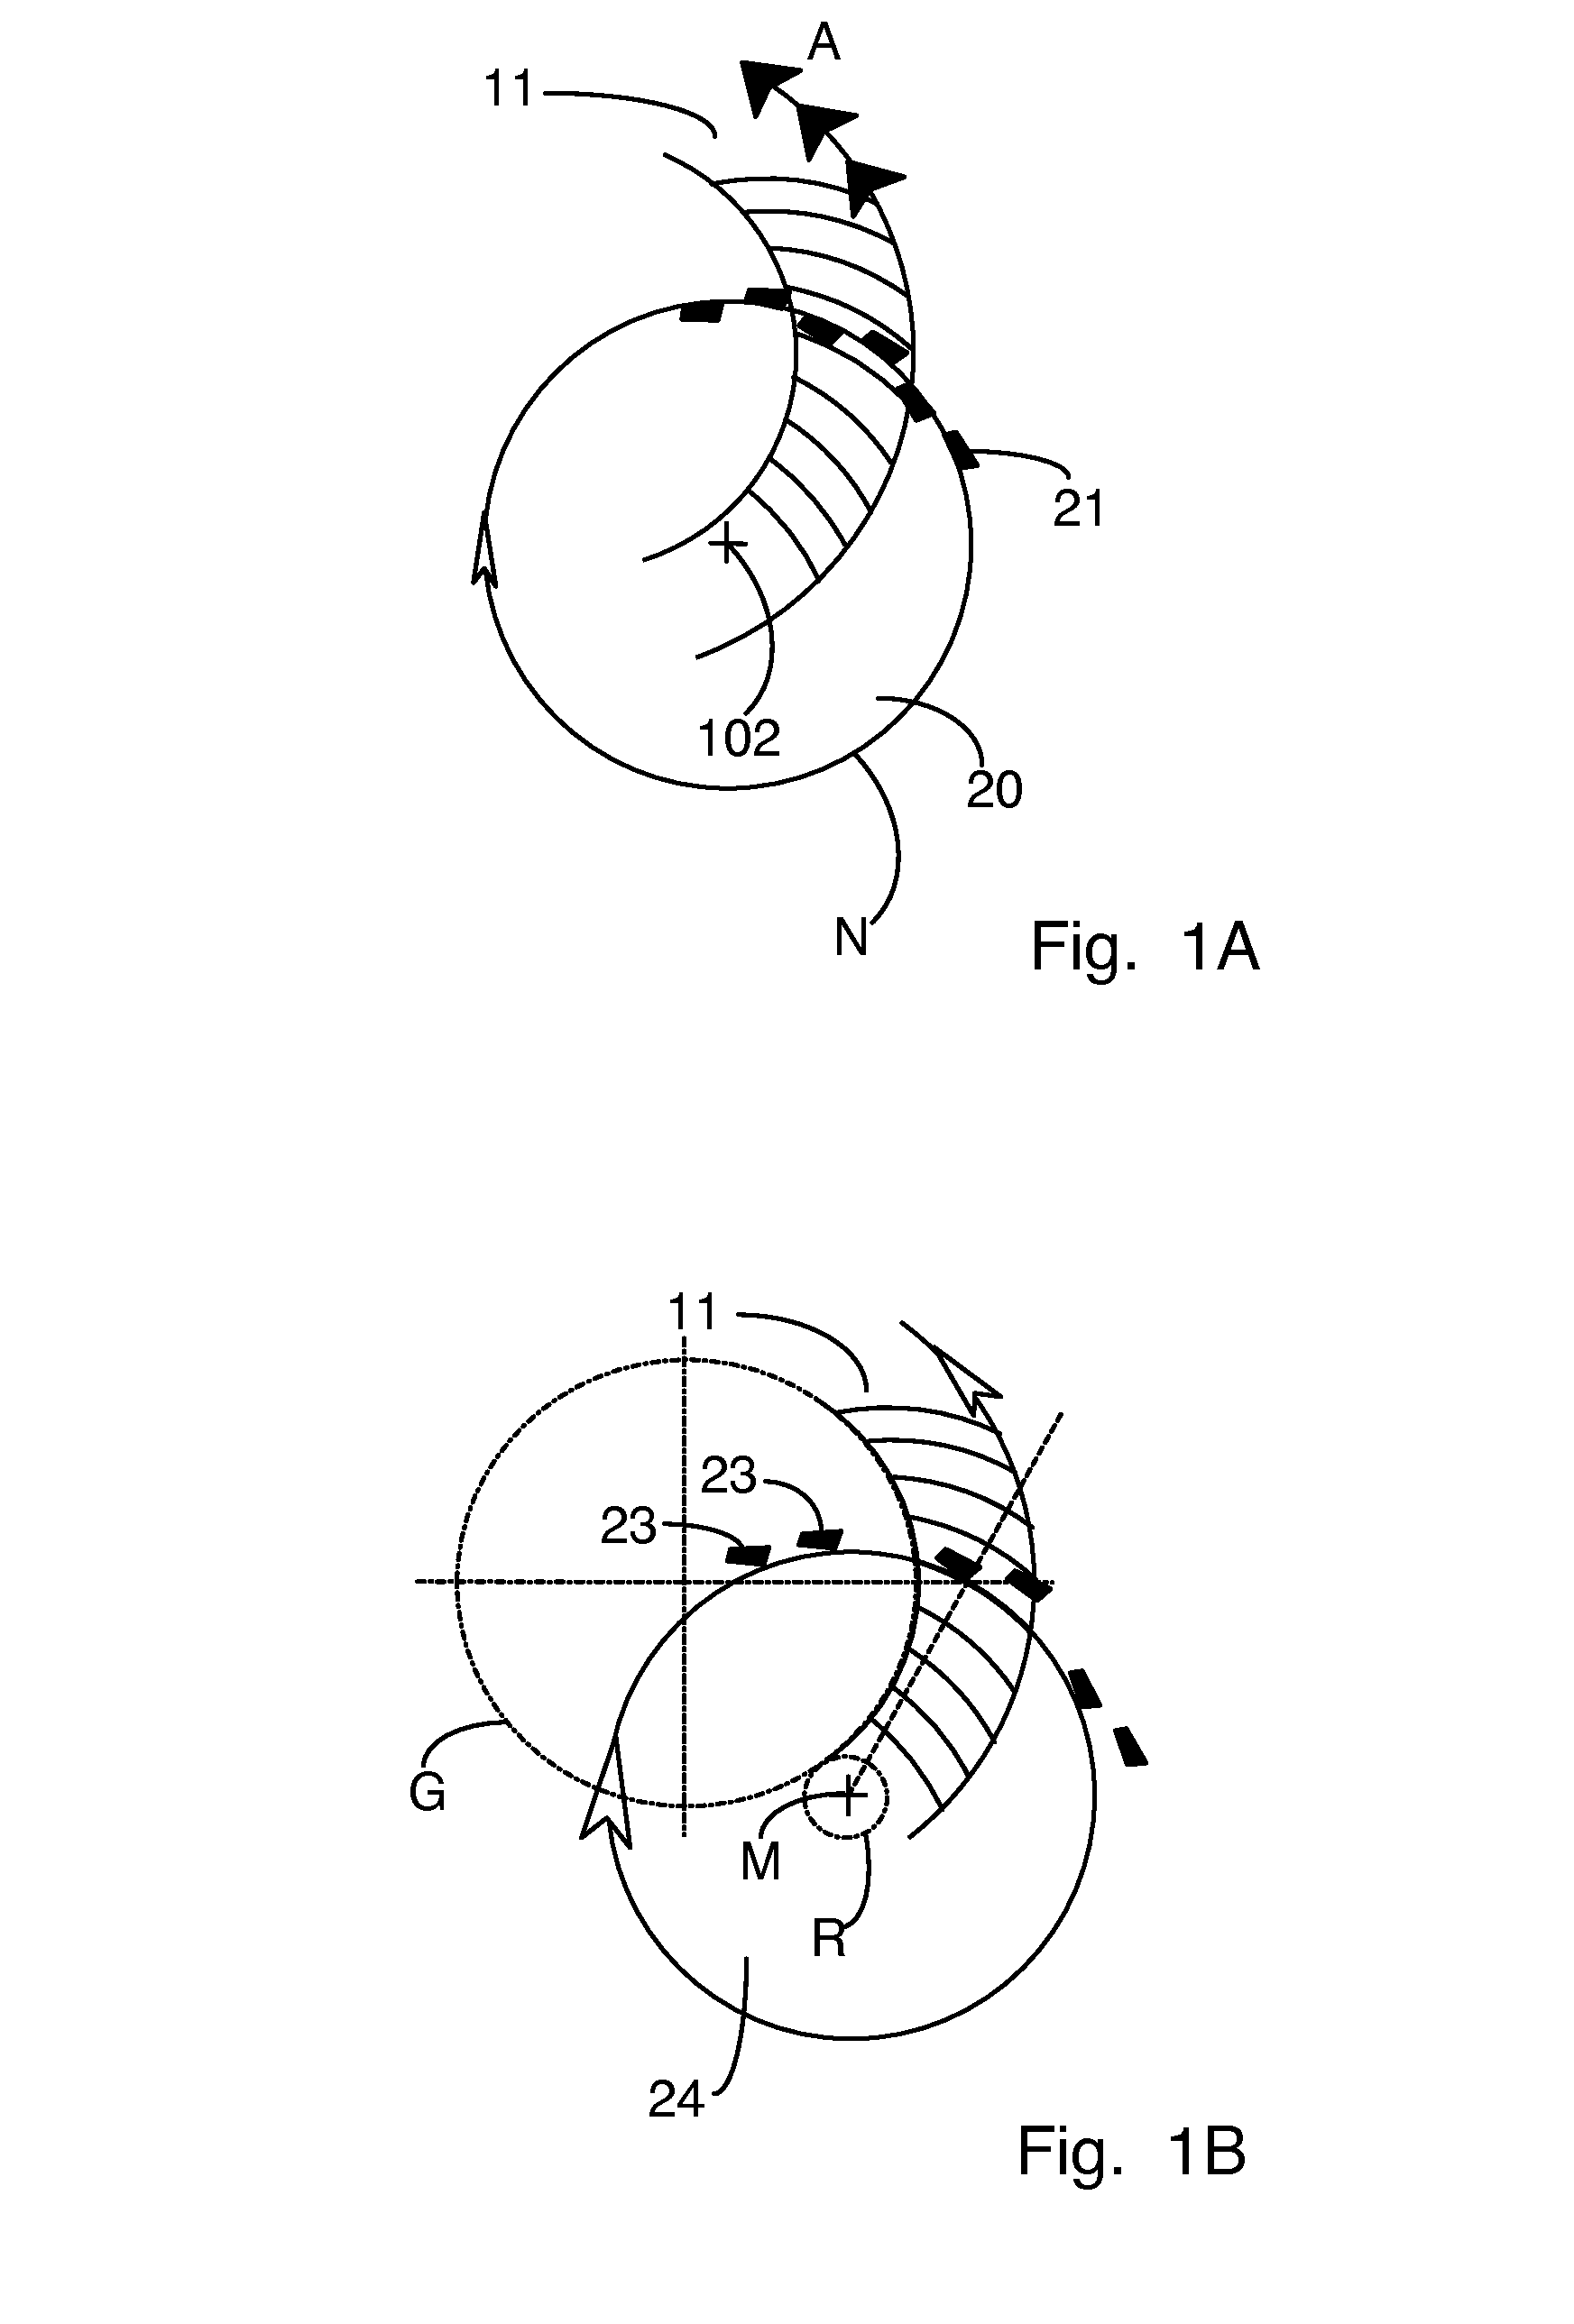 Universally usable bar cutter head and use thereof